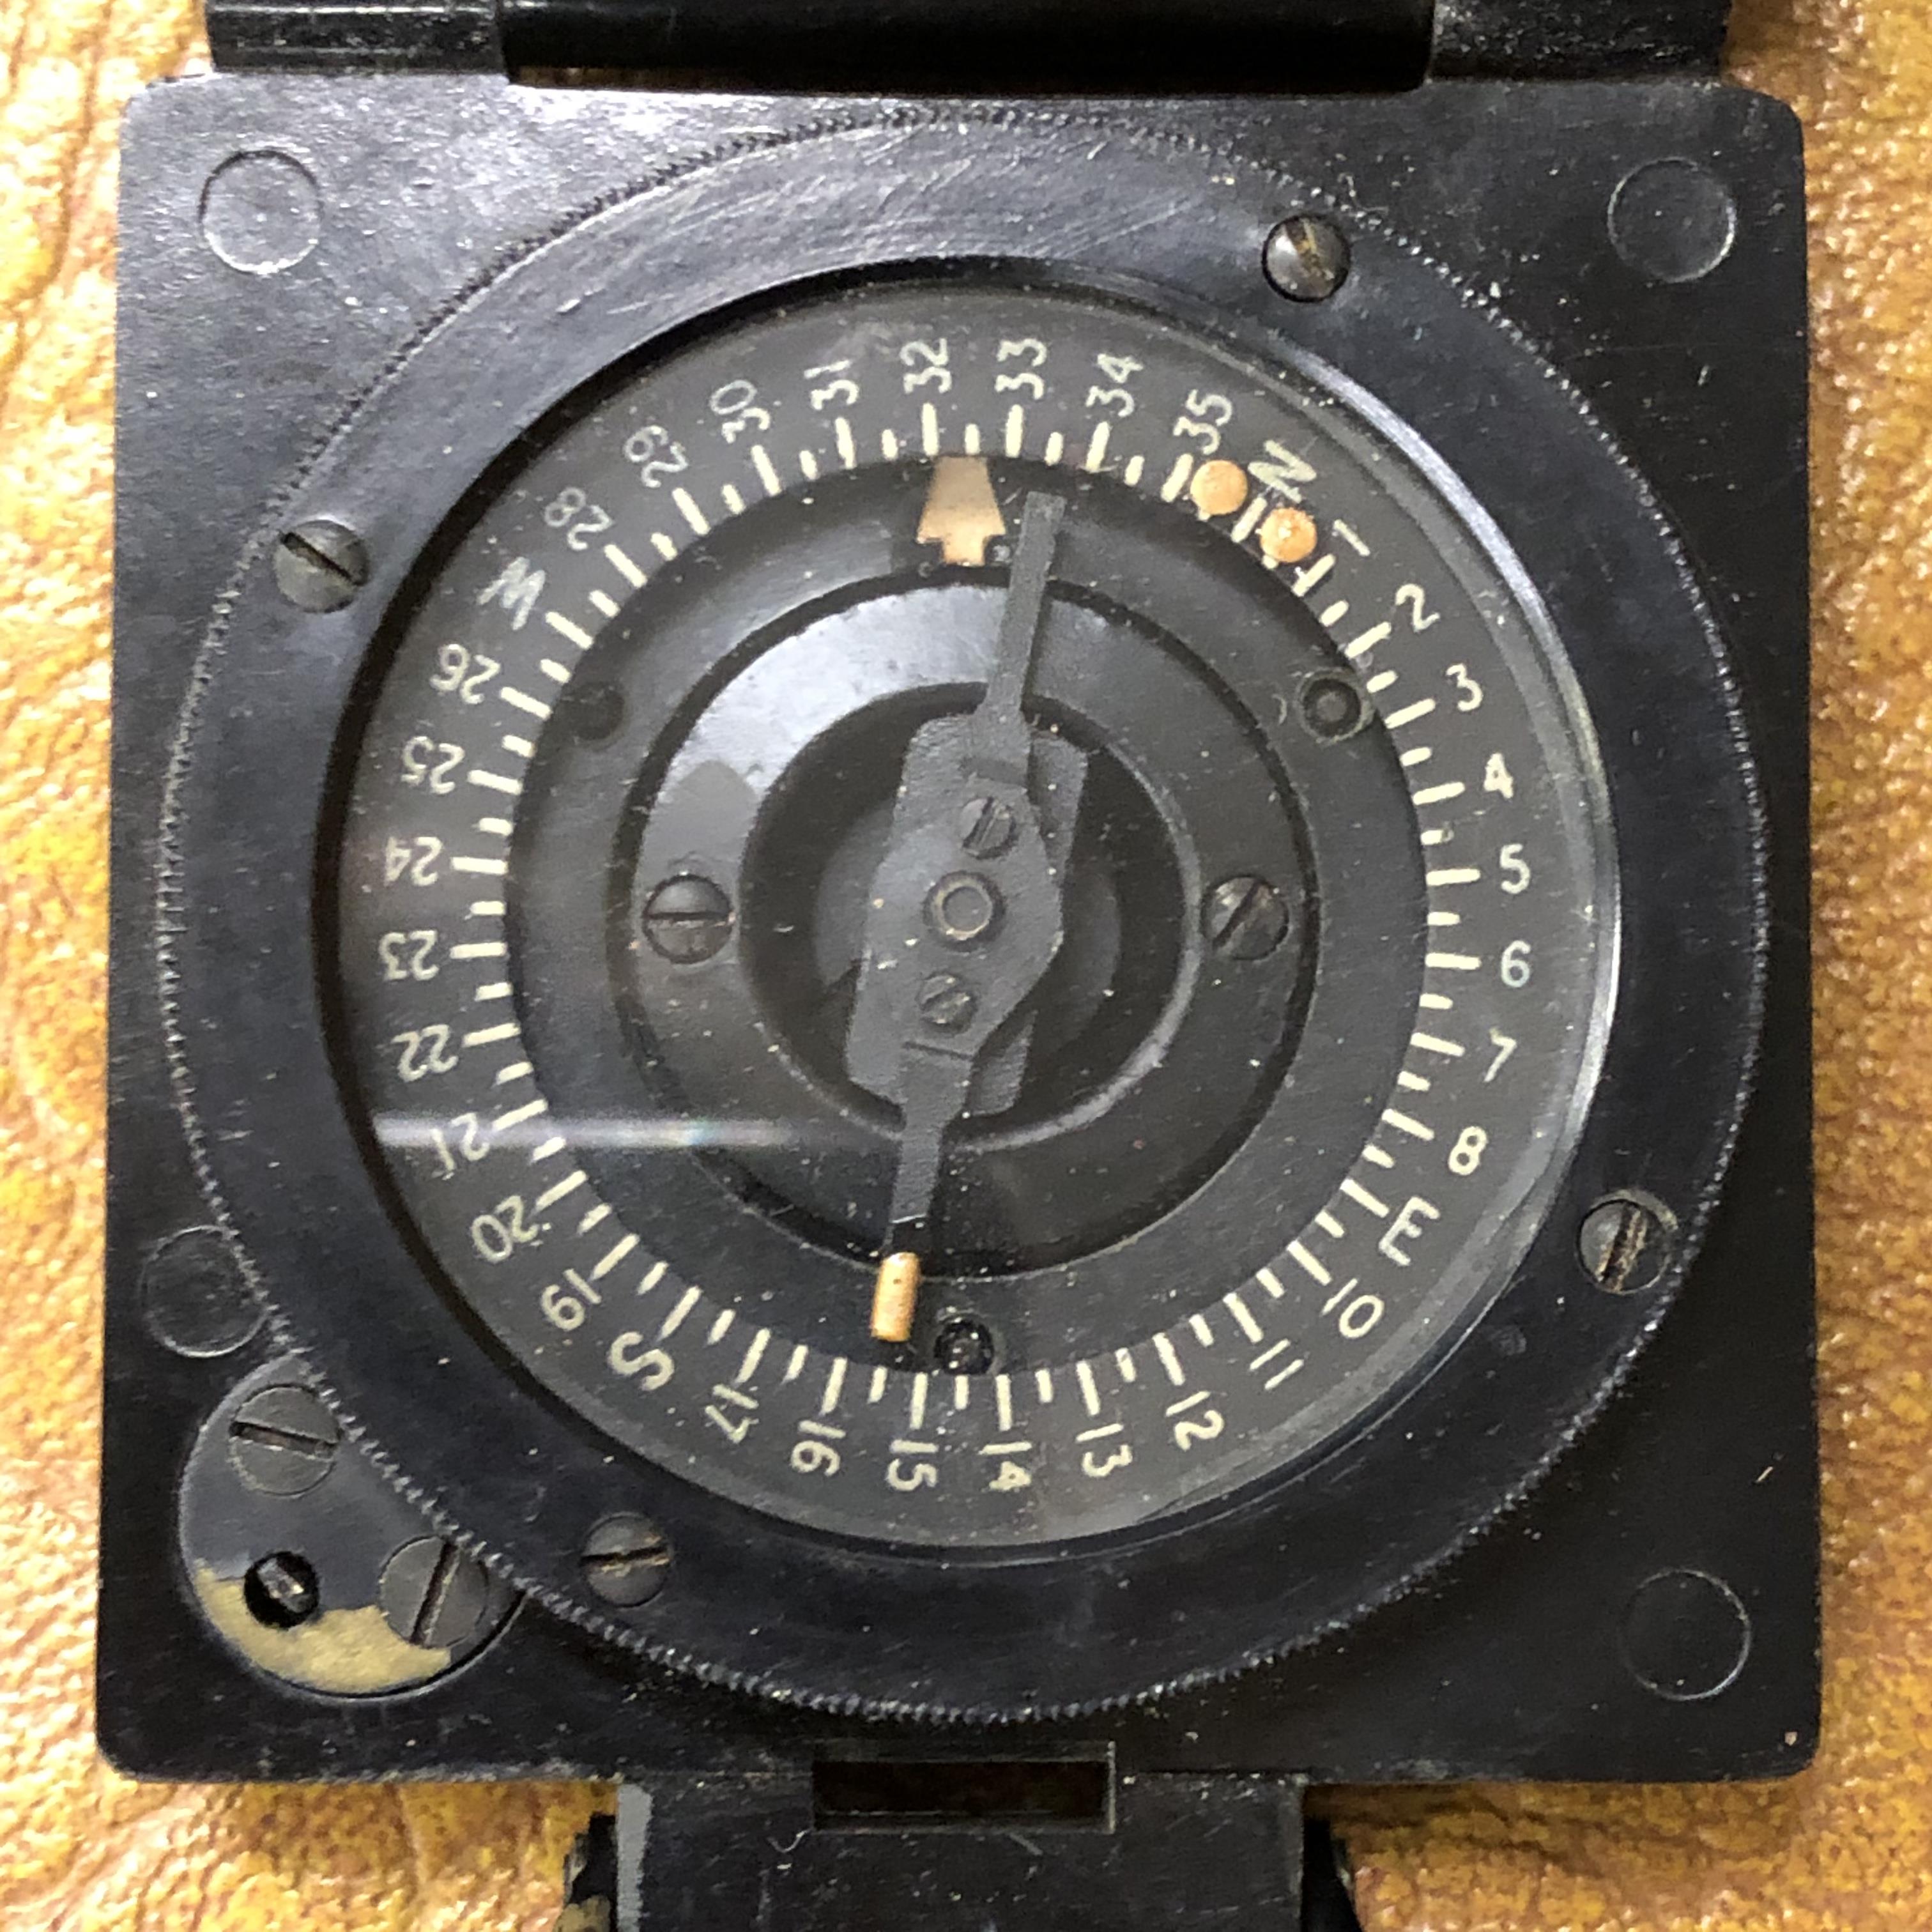 MILITARY FIELD COMPASS MK1 NUMBER B299559 - Image 2 of 4